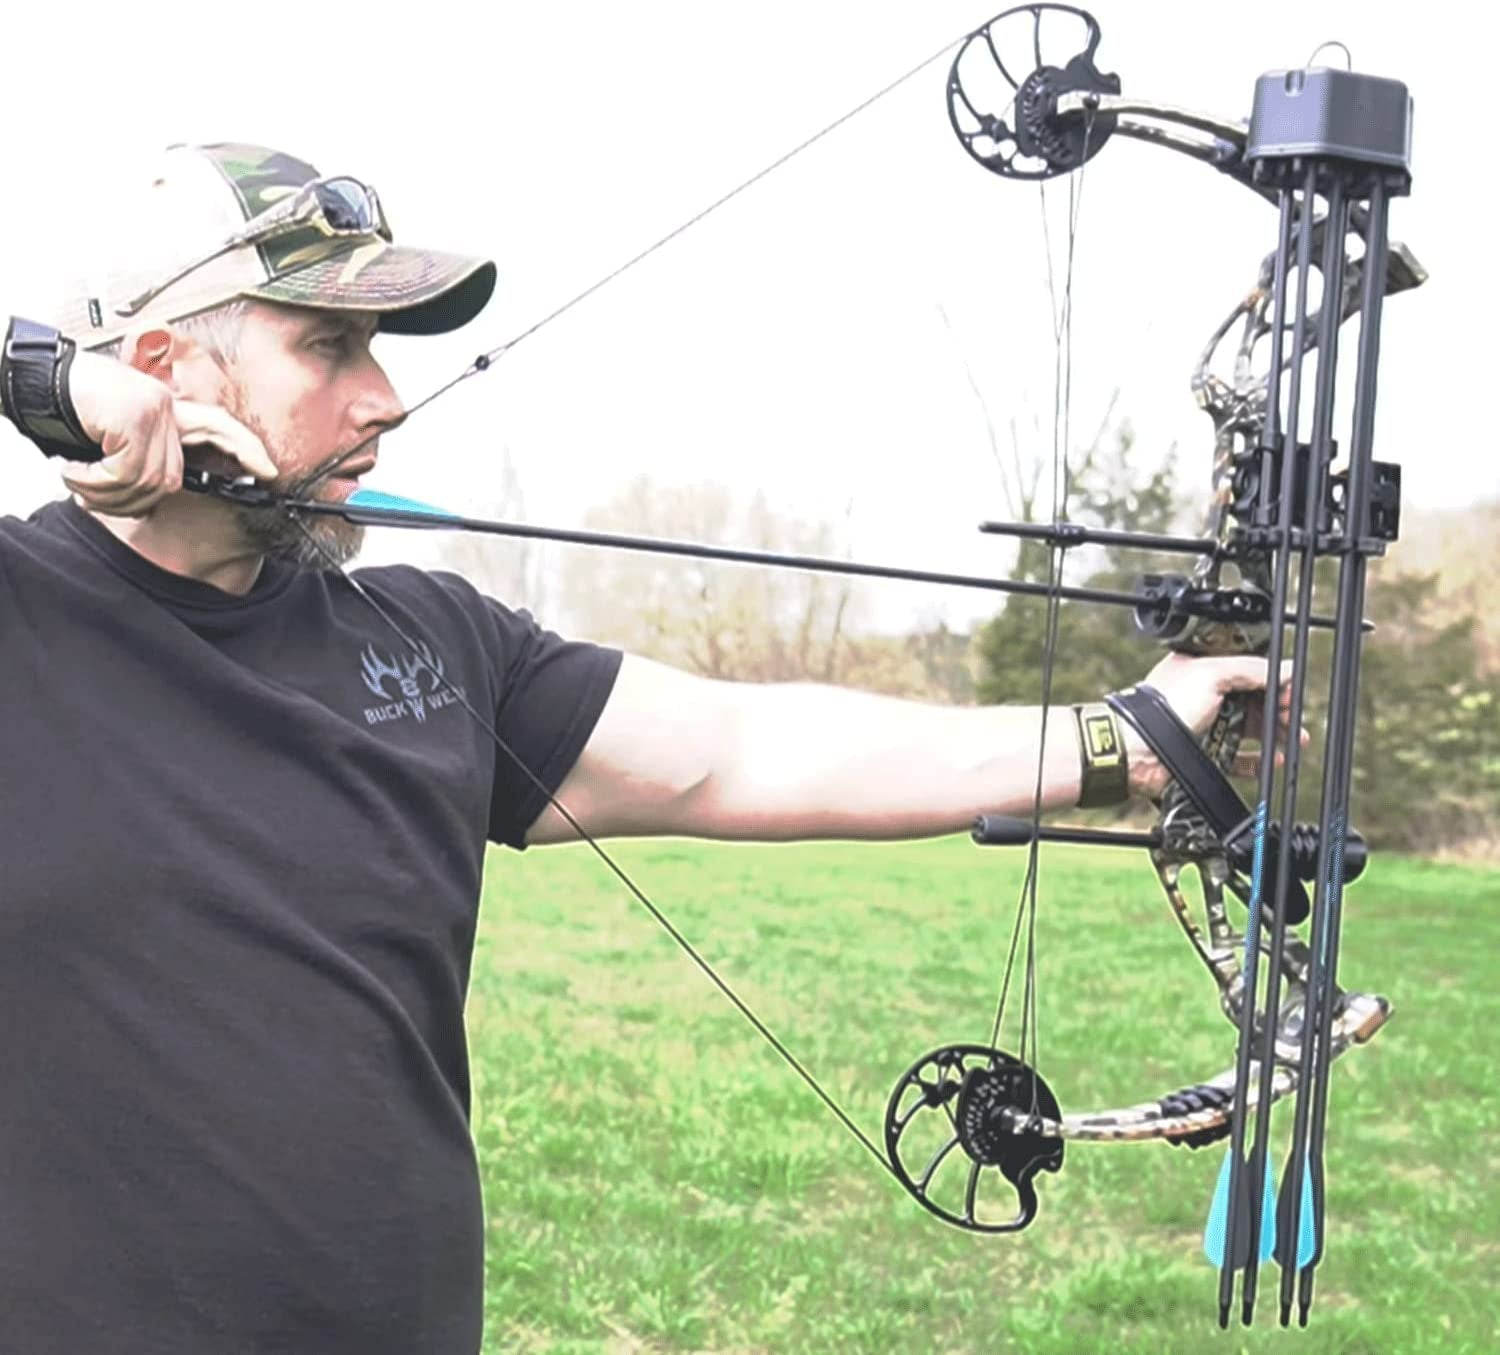 Archery Dragon X8 RTH Compound Bow Package for Adults and Teens,18”-31” Draw Length,0-70 Lbs Draw Weight,Up to IBO 310 Fps,No Bow Press Needed,Limbs Made in Usa,Limited Life-Time Warranty